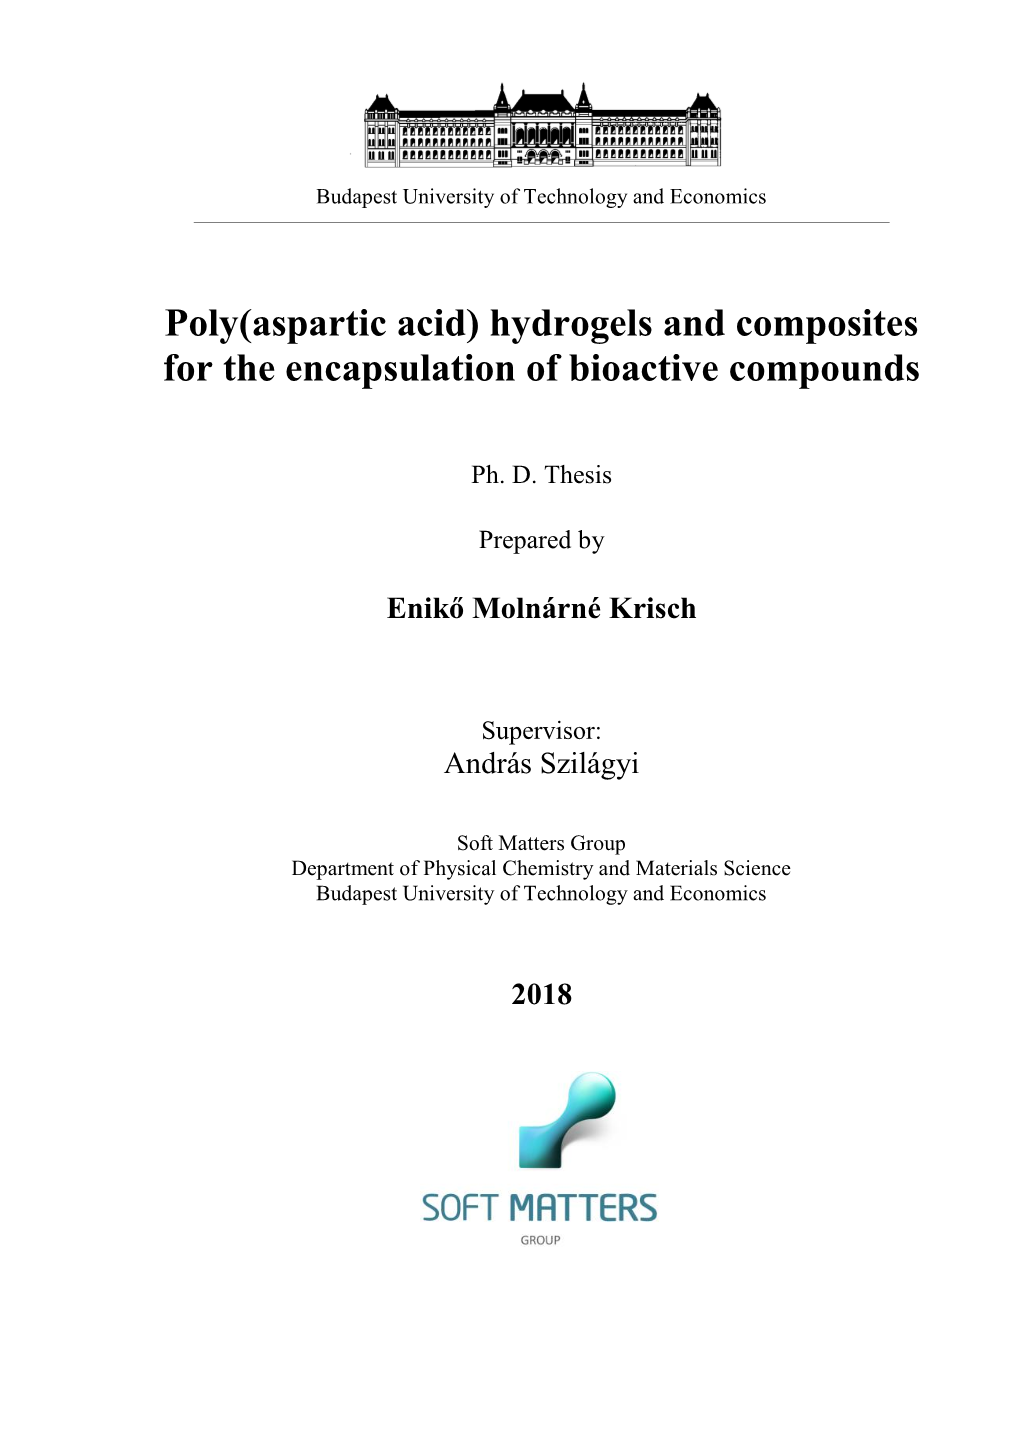 Poly(Aspartic Acid) Hydrogels and Composites for the Encapsulation of Bioactive Compounds